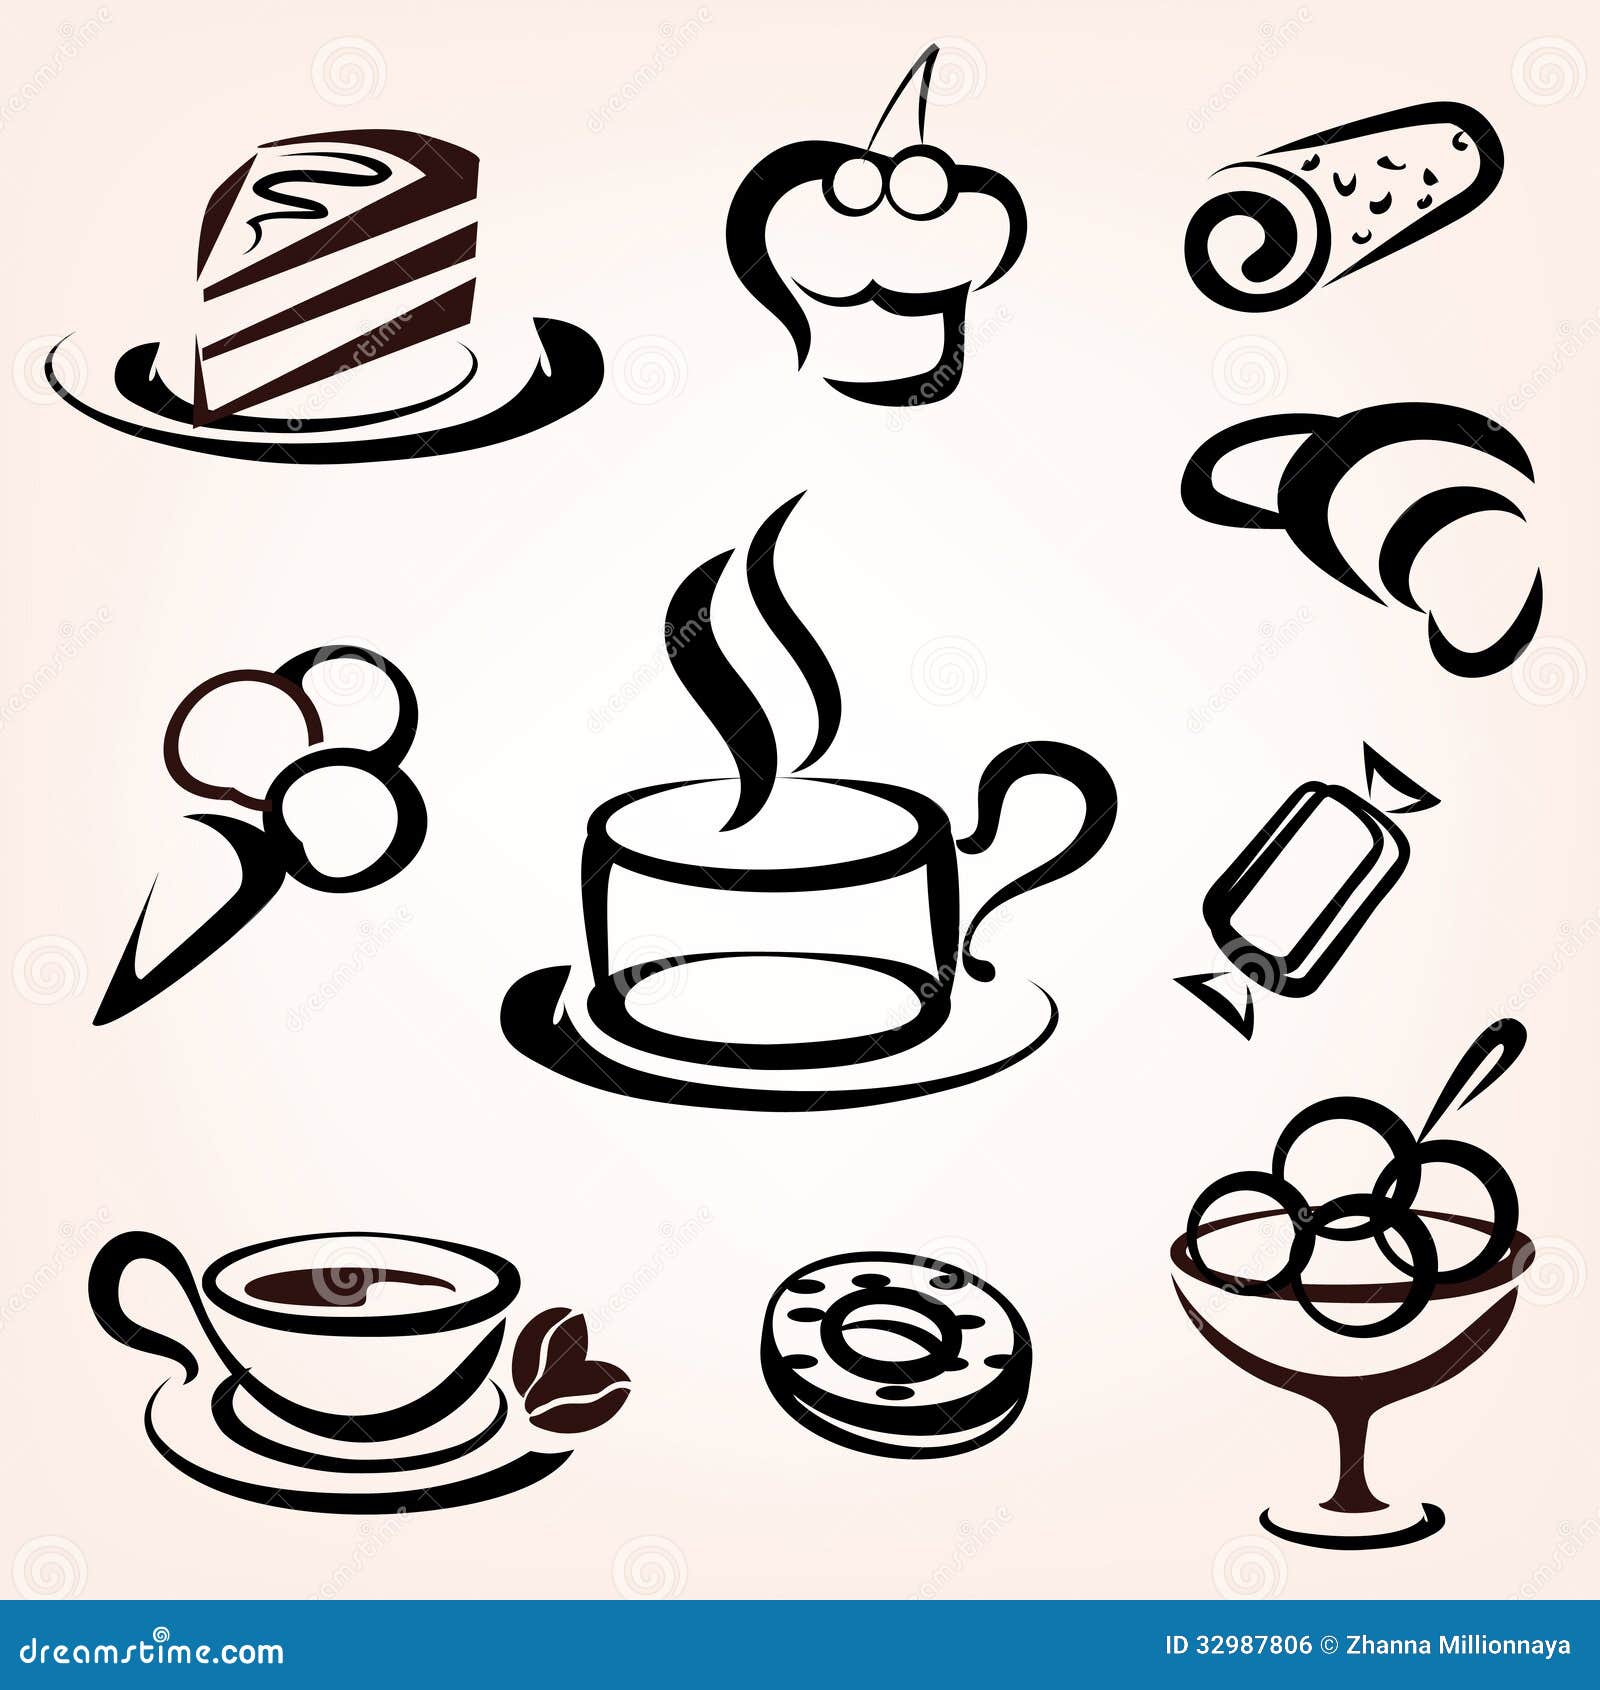 caffe, bakery and other sweet pastry icons